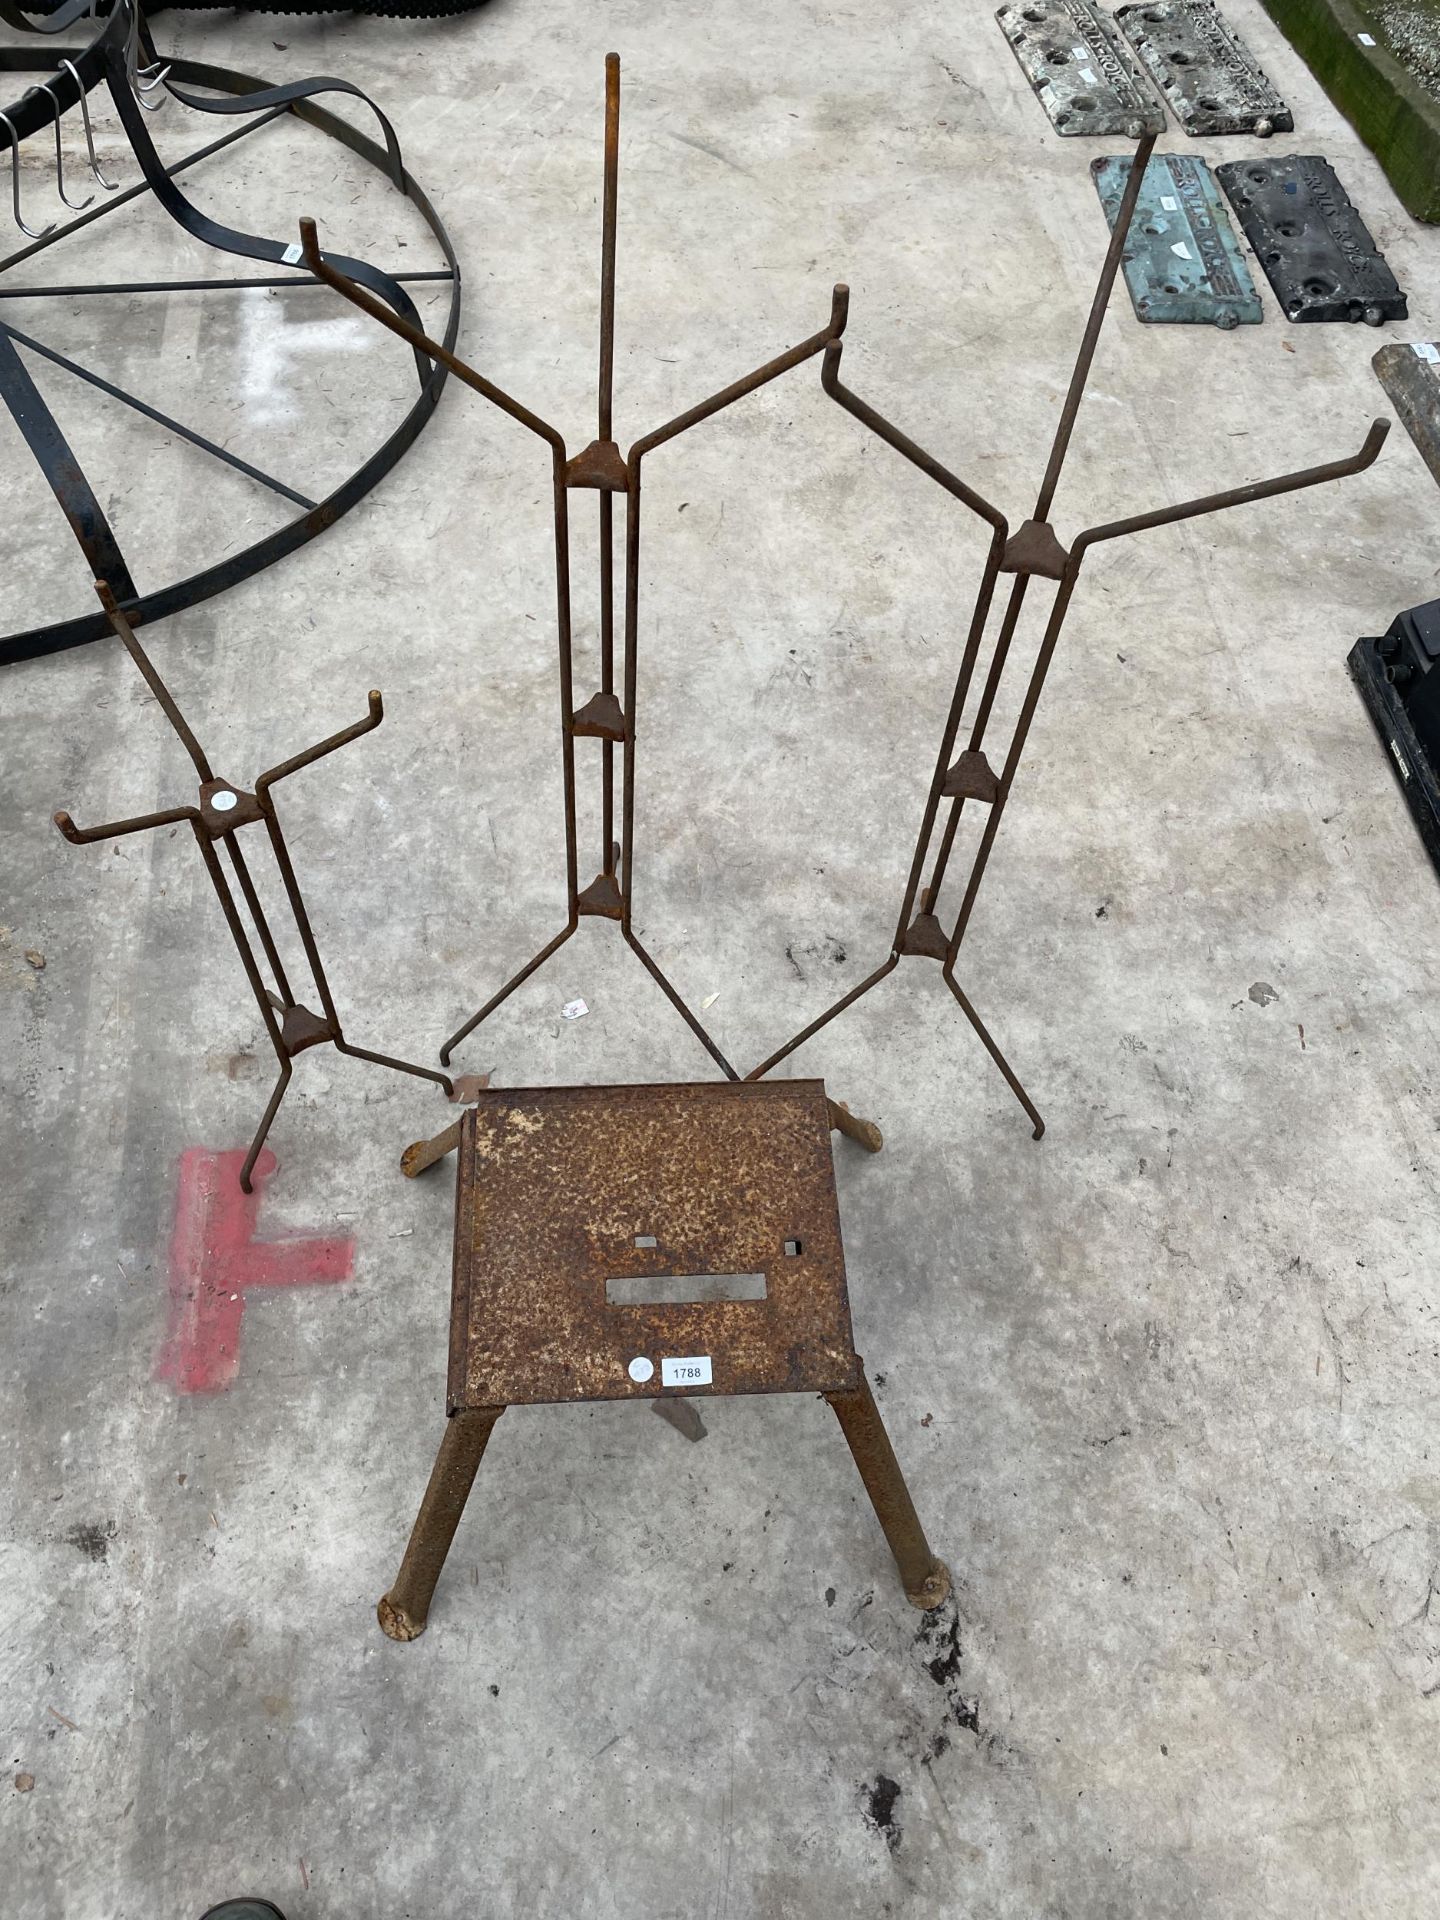 A METAL STOOL AND THREE METAL SHOP DISPLAY STANDS